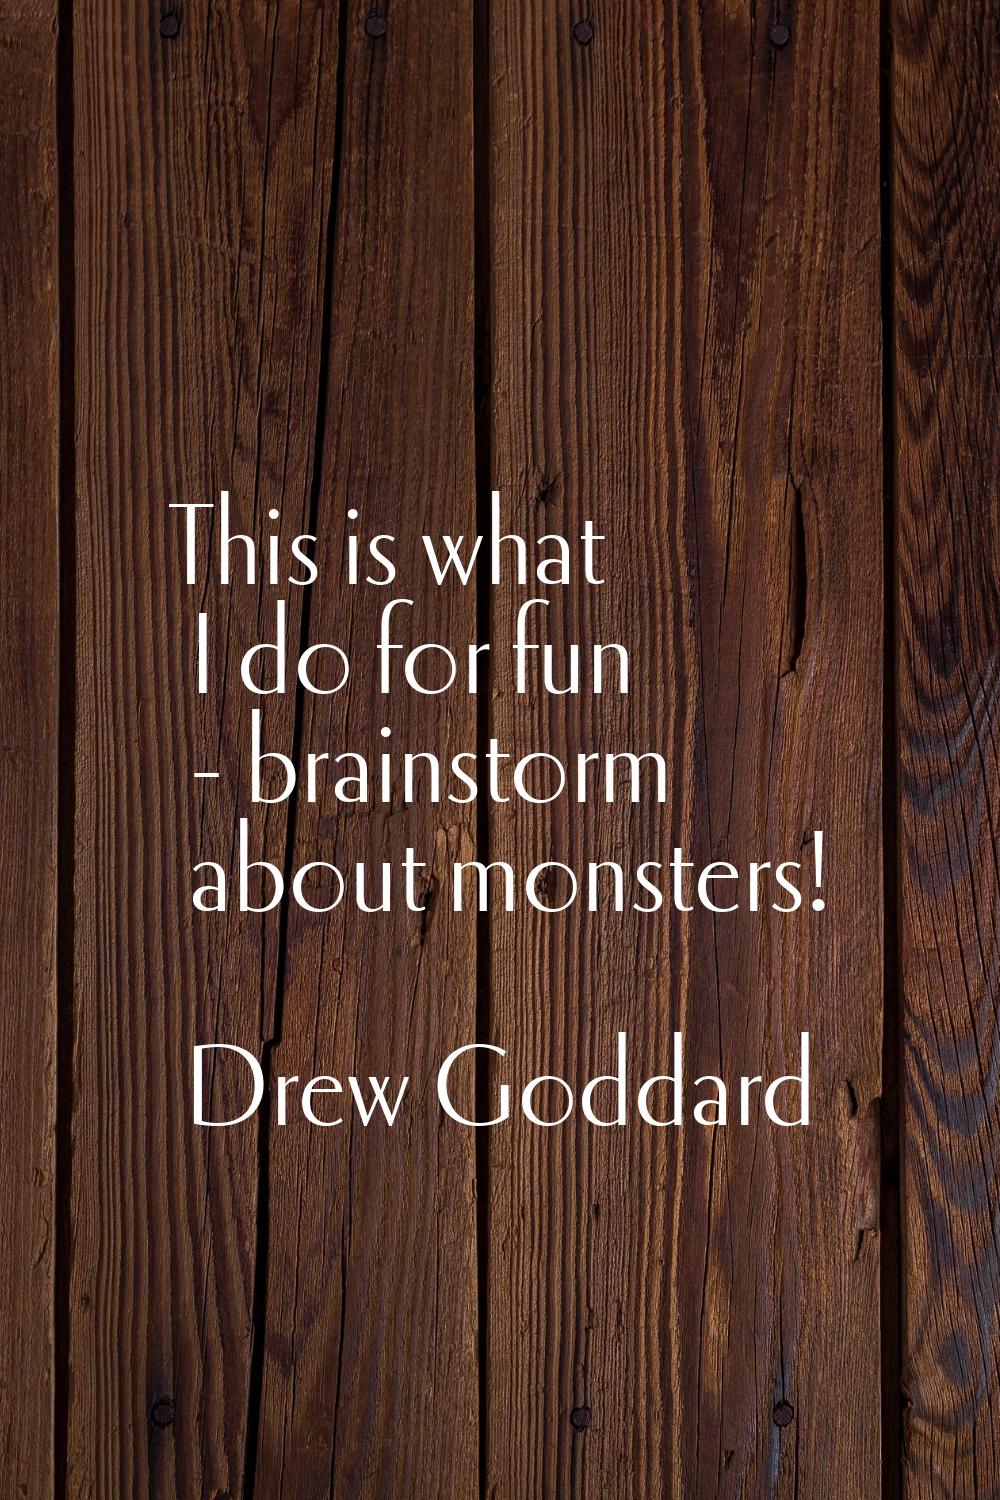 This is what I do for fun - brainstorm about monsters!